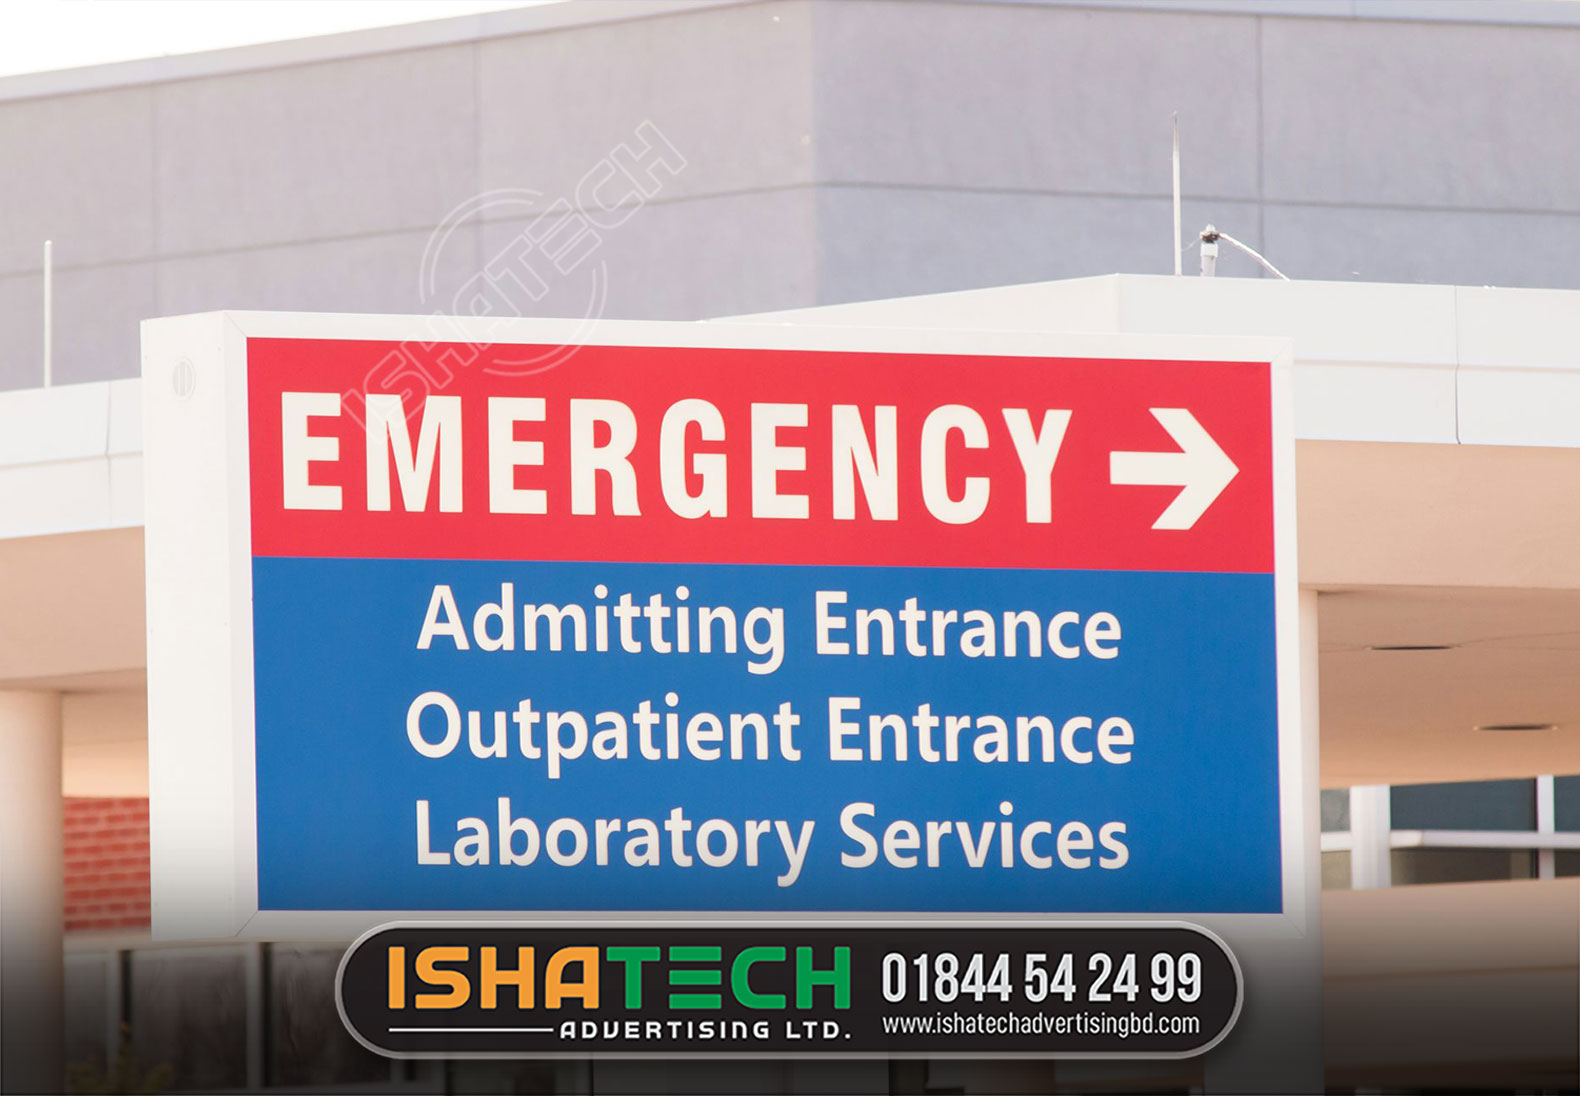 EMERGENCY ADMITTING ENTRANCE | OUTPATIENT ENTRANCE NAME PLATE | LABORATORY SERVICE NAME PLATE